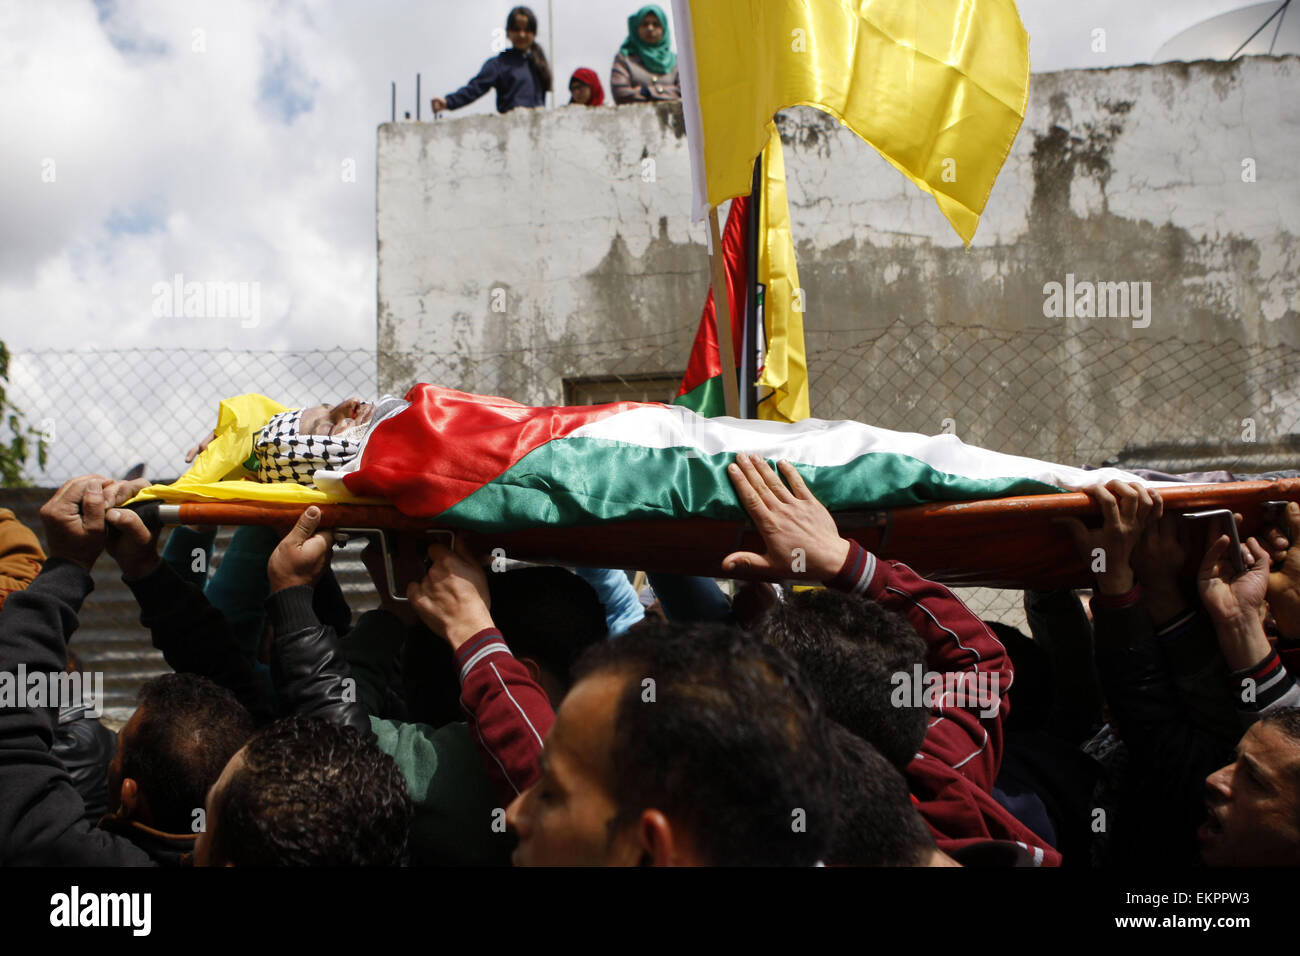 Sinjil, West Bank, Palestinian Territory. 12th Apr, 2015. Mourners carry the body of 27-year-old Palestinian Mohammed Jasser Karakra, during his funeral in the Sinjil village, in the occupied West Bank city of Ramallah, on April 13, 2015. Karakra stabbed two Israeli soldiers in the northern West Bank on April 8, 2015, wounding one seriously before being shot dead. It was the second knife attack in a week targeting Israeli soldiers and the latest in a wave of lone-wolf attacks which have been on the rise since last summer's 50-day war in the Gaza Strip (Credit Image: © Shadi Hatem/APA Images Stock Photo